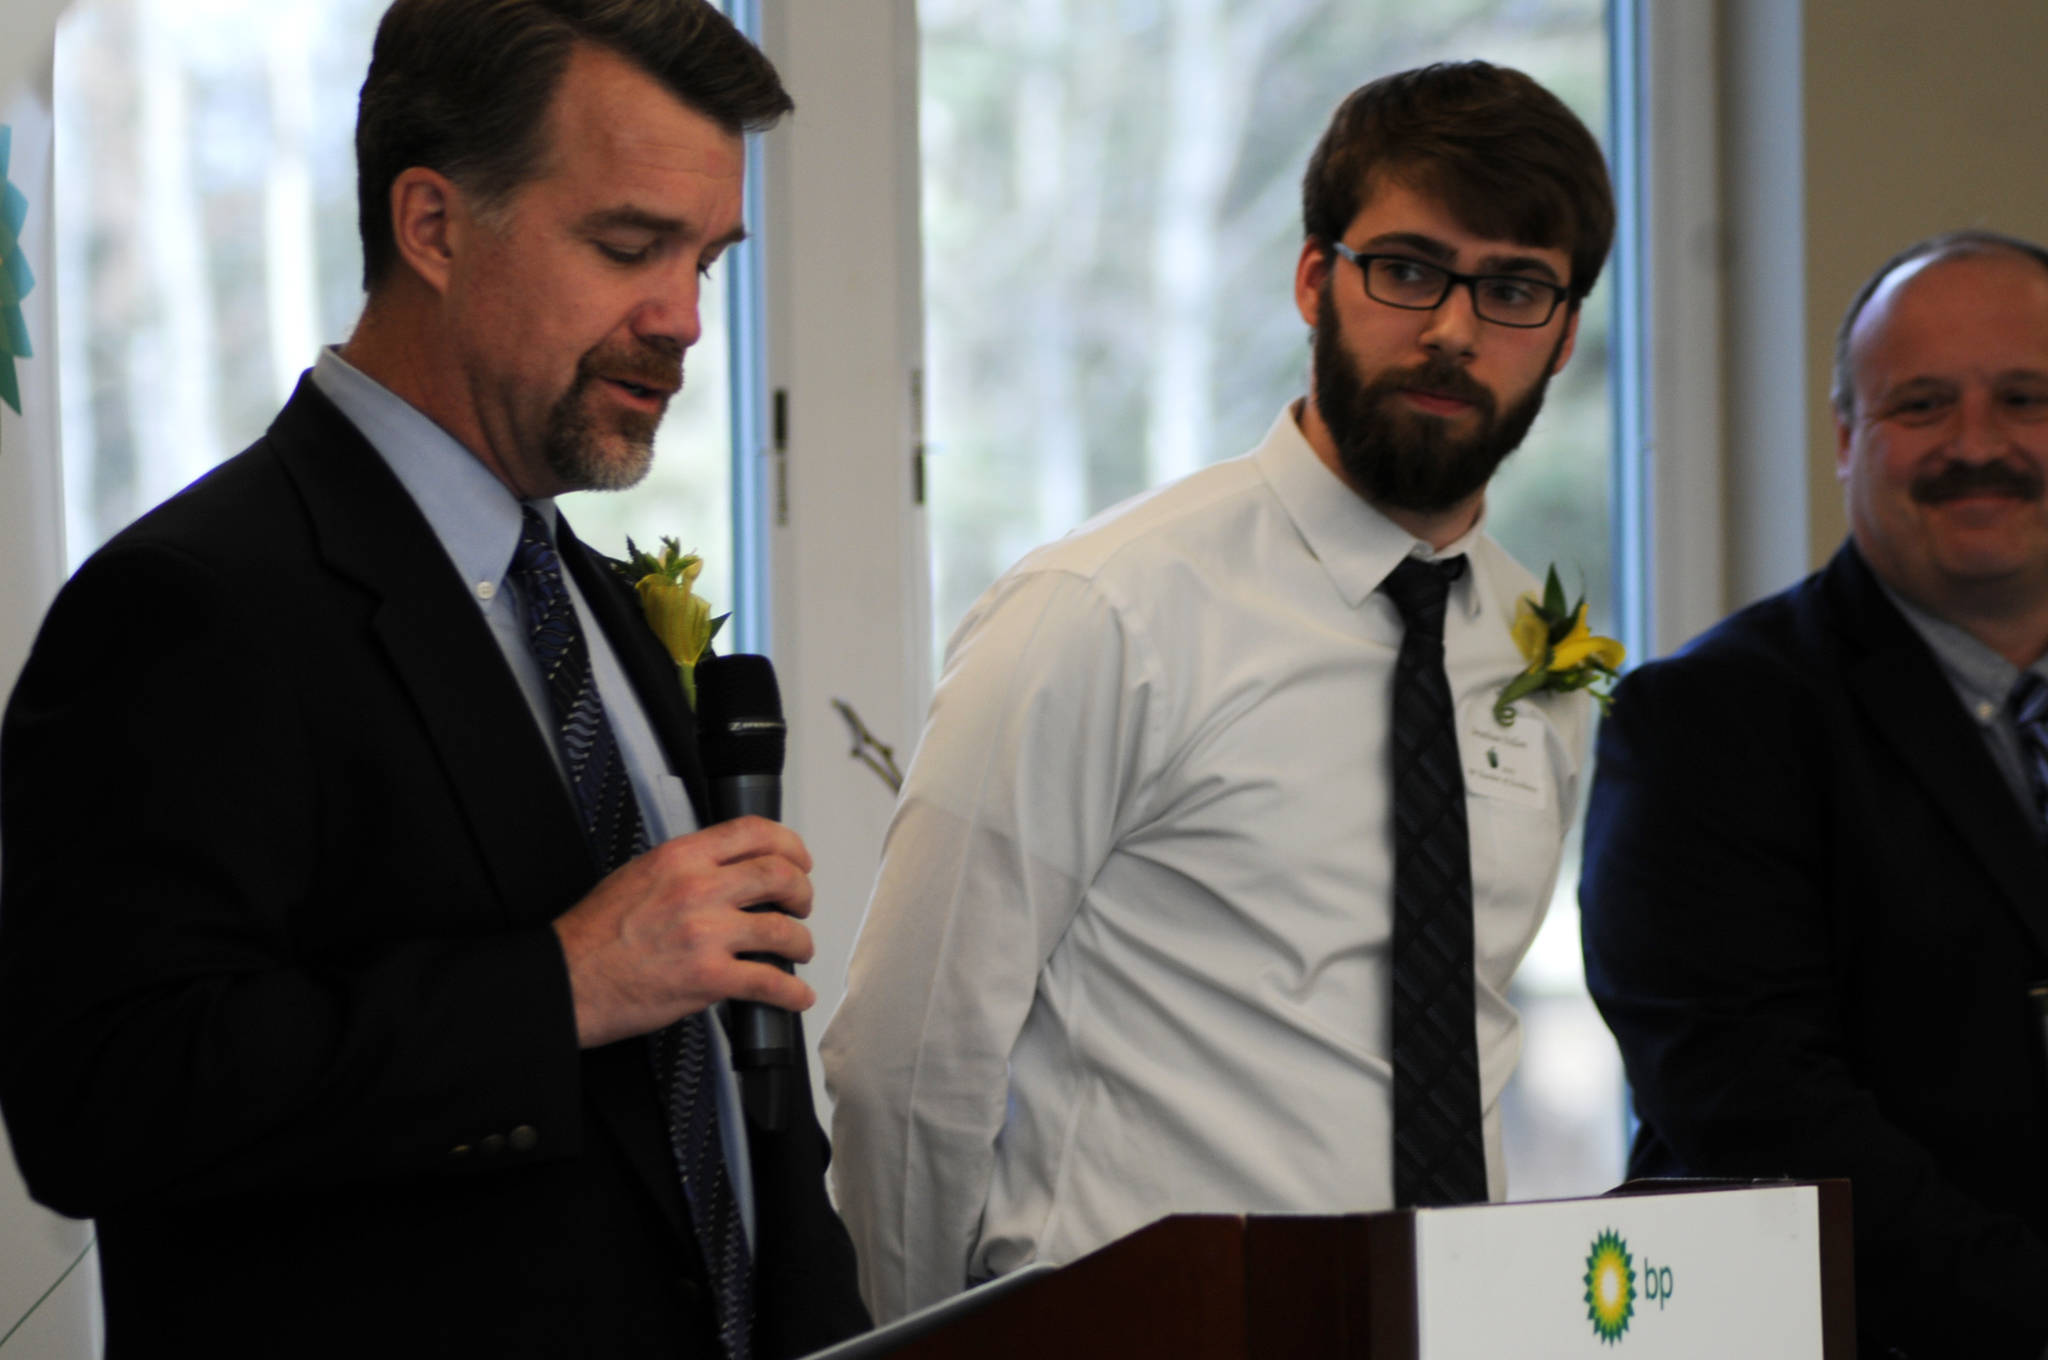 Mountain View Elementary School music teacher Jonathan Dillon (center) waits to receive a certificate recognizing him as one of the BP Teachers of Excellence for 2017 during an awards banquet on Thursday, April 27, 2017 in Soldotna, Alaska. BP recognized five teachers from around the Kenai Peninsula Borough School District for excellence in teaching with certificates, $500 gift cards and $500 donations to their schools. (Elizabeth Earl/Peninsula Clarion)